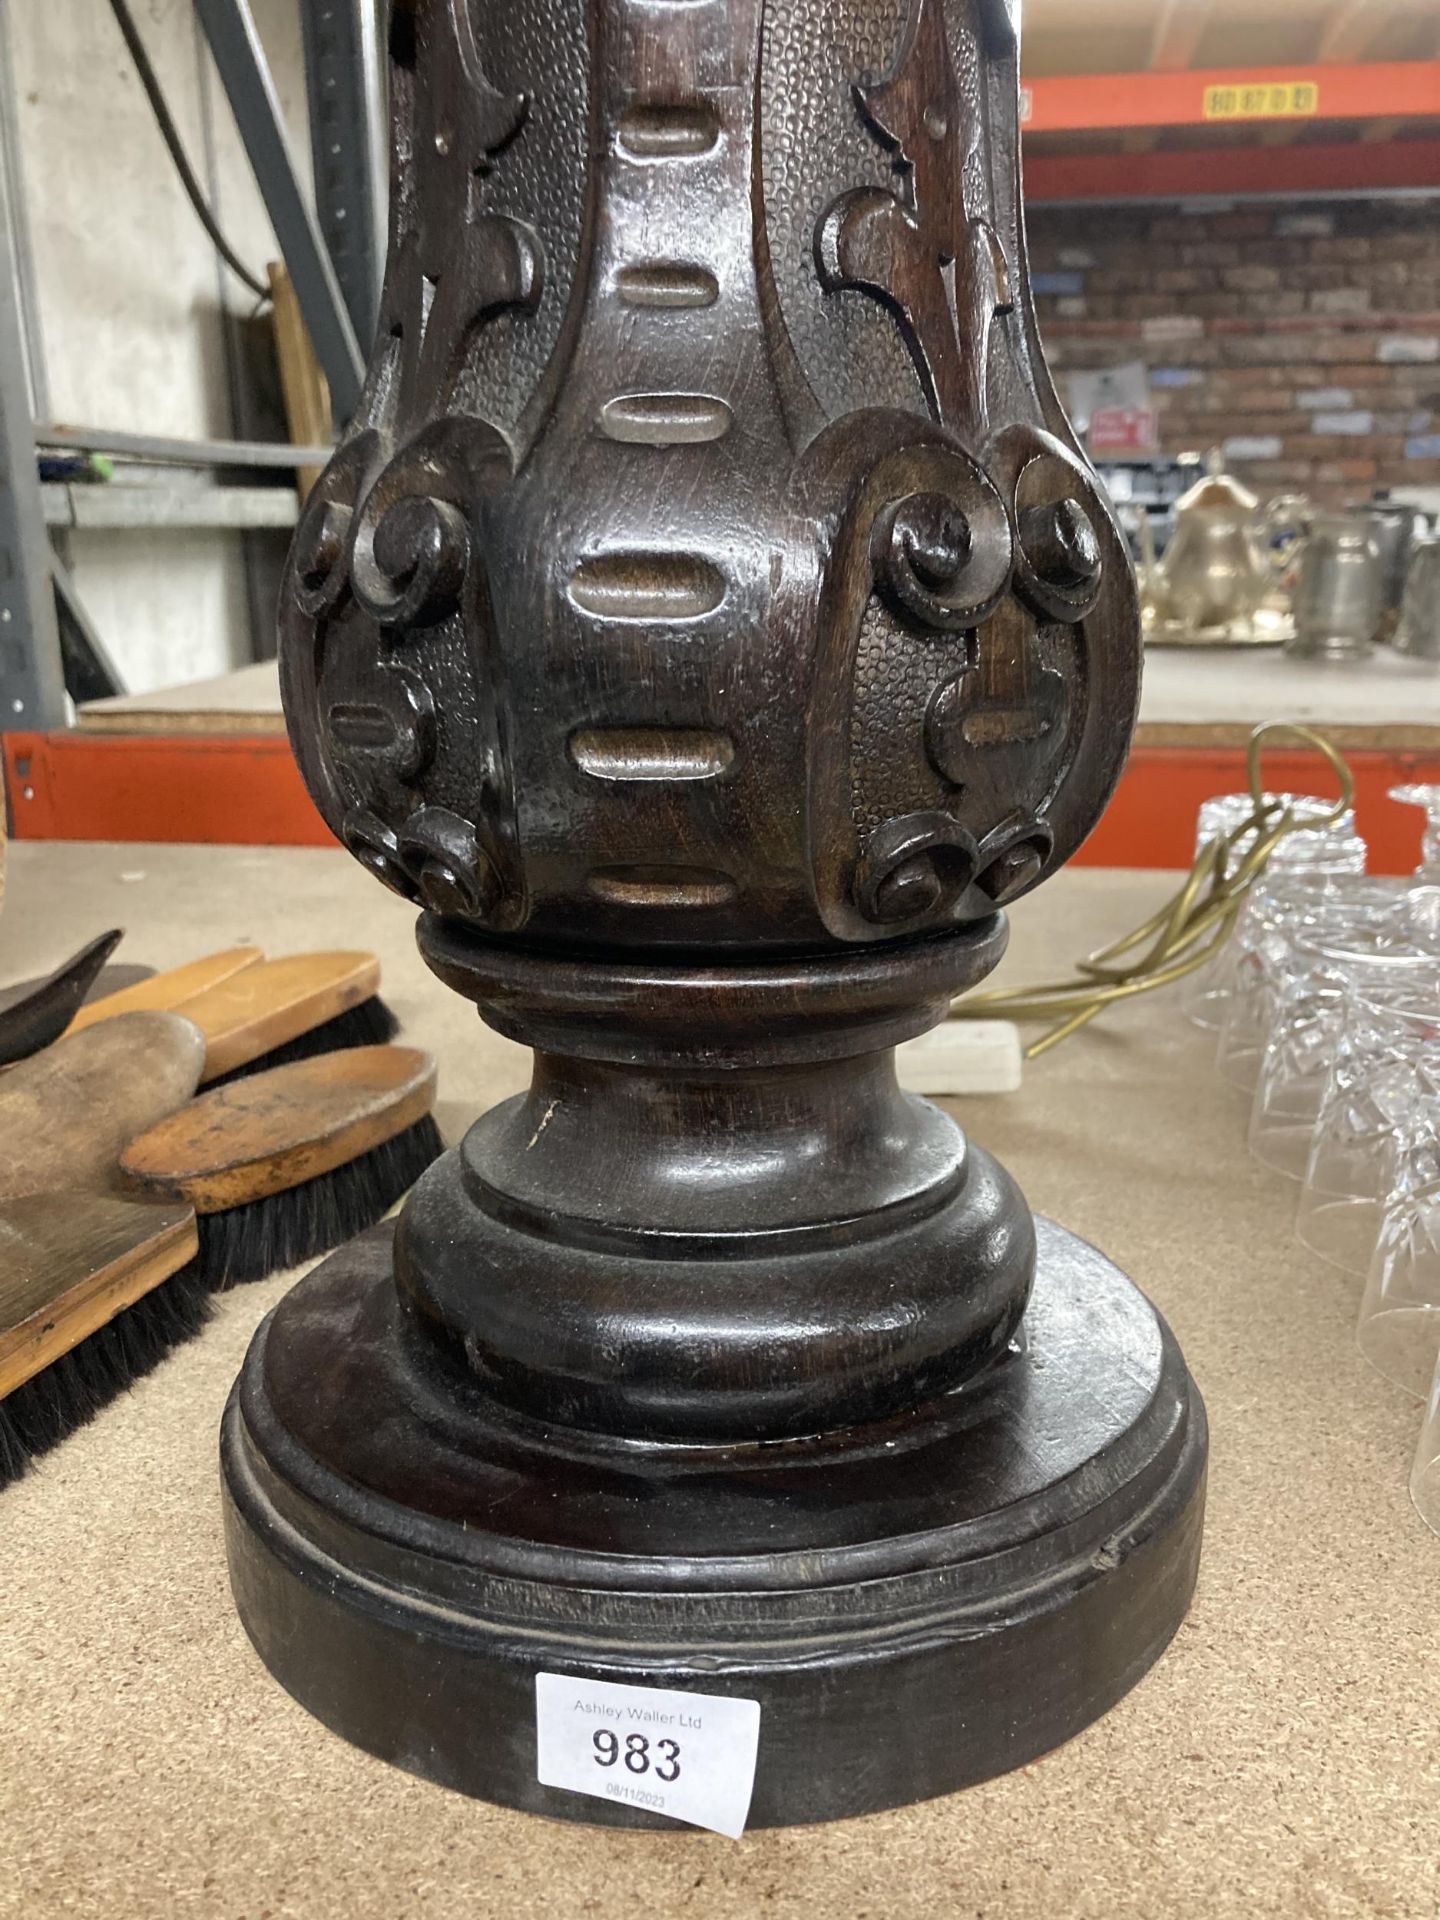 A LARGE TABLE LAMP, THE BASE BEING MADE FROM THE LEG OF A BILLIARD TABLE, HEIGHT 58CM - Image 3 of 3